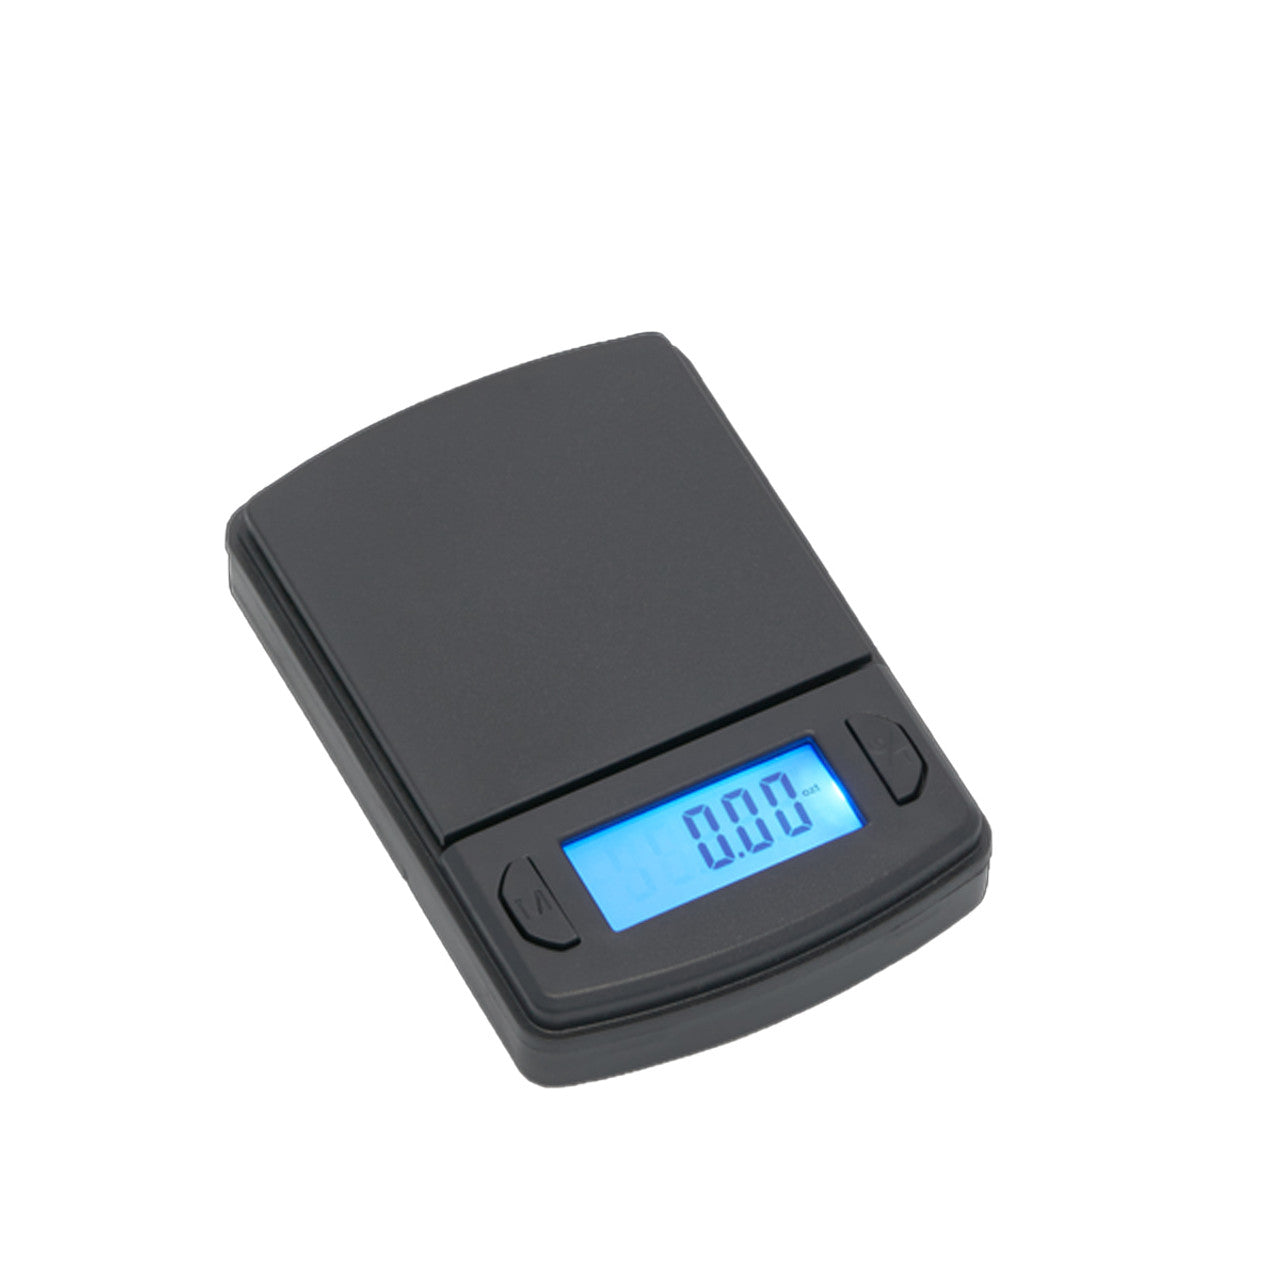 American Weigh Scales - MS-600 Gram Precision Scale